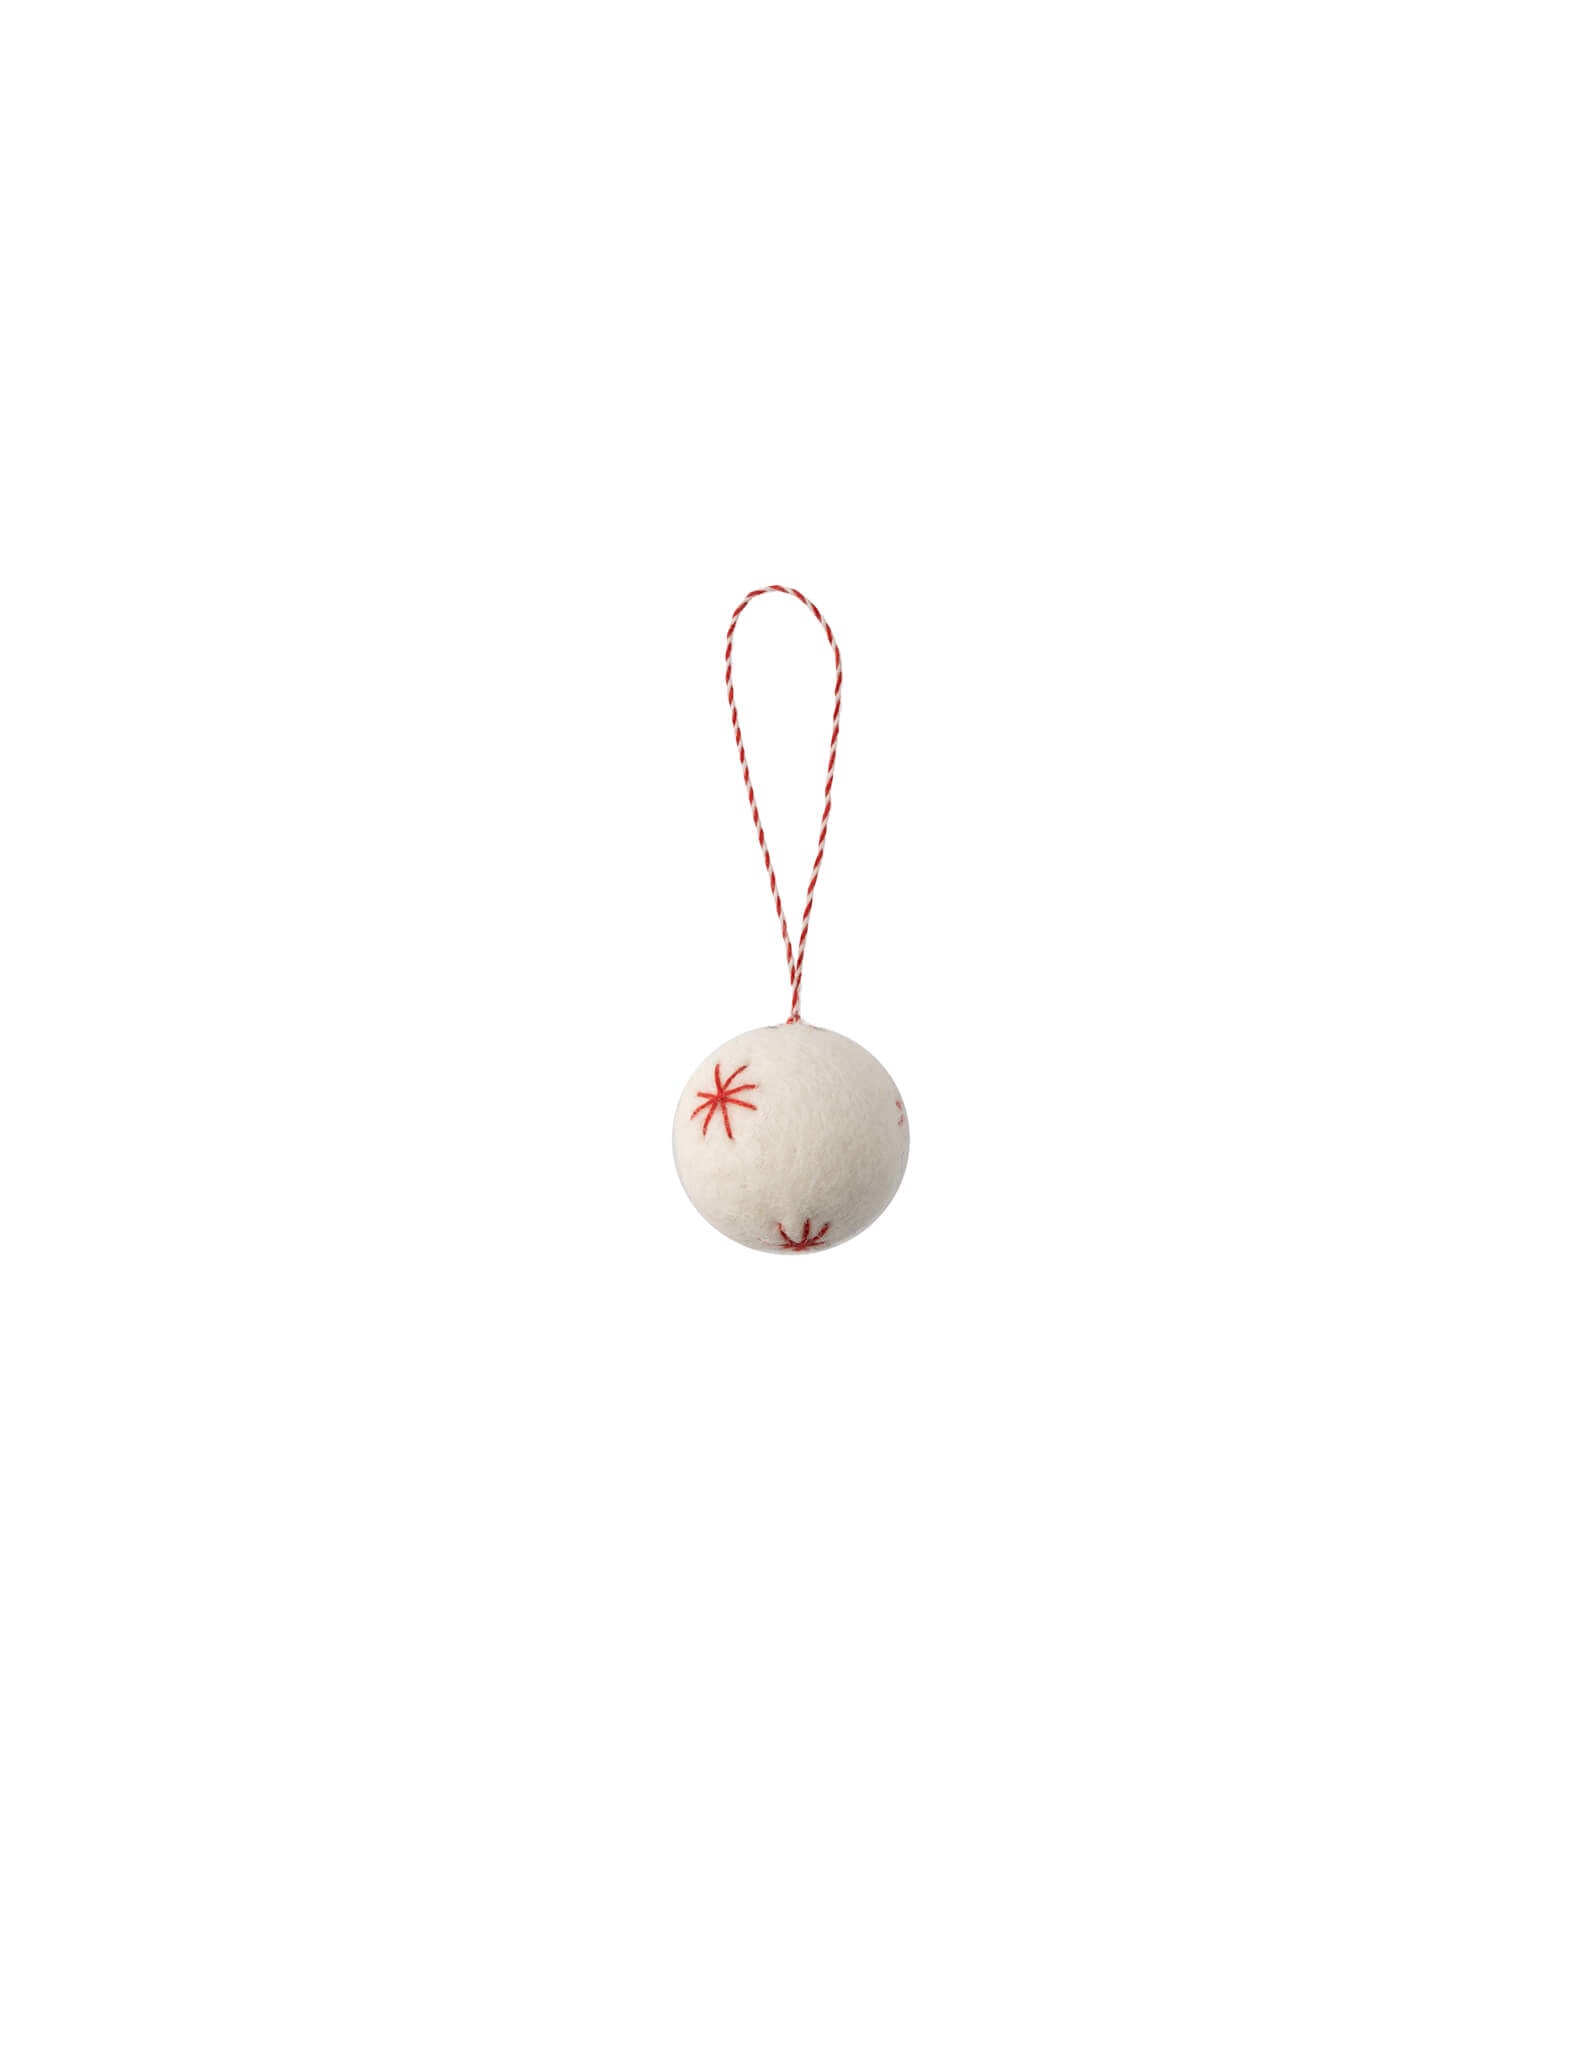 Kullinge Decoration | White or Red | Fairtrade Wool | by Storefactory - Lifestory